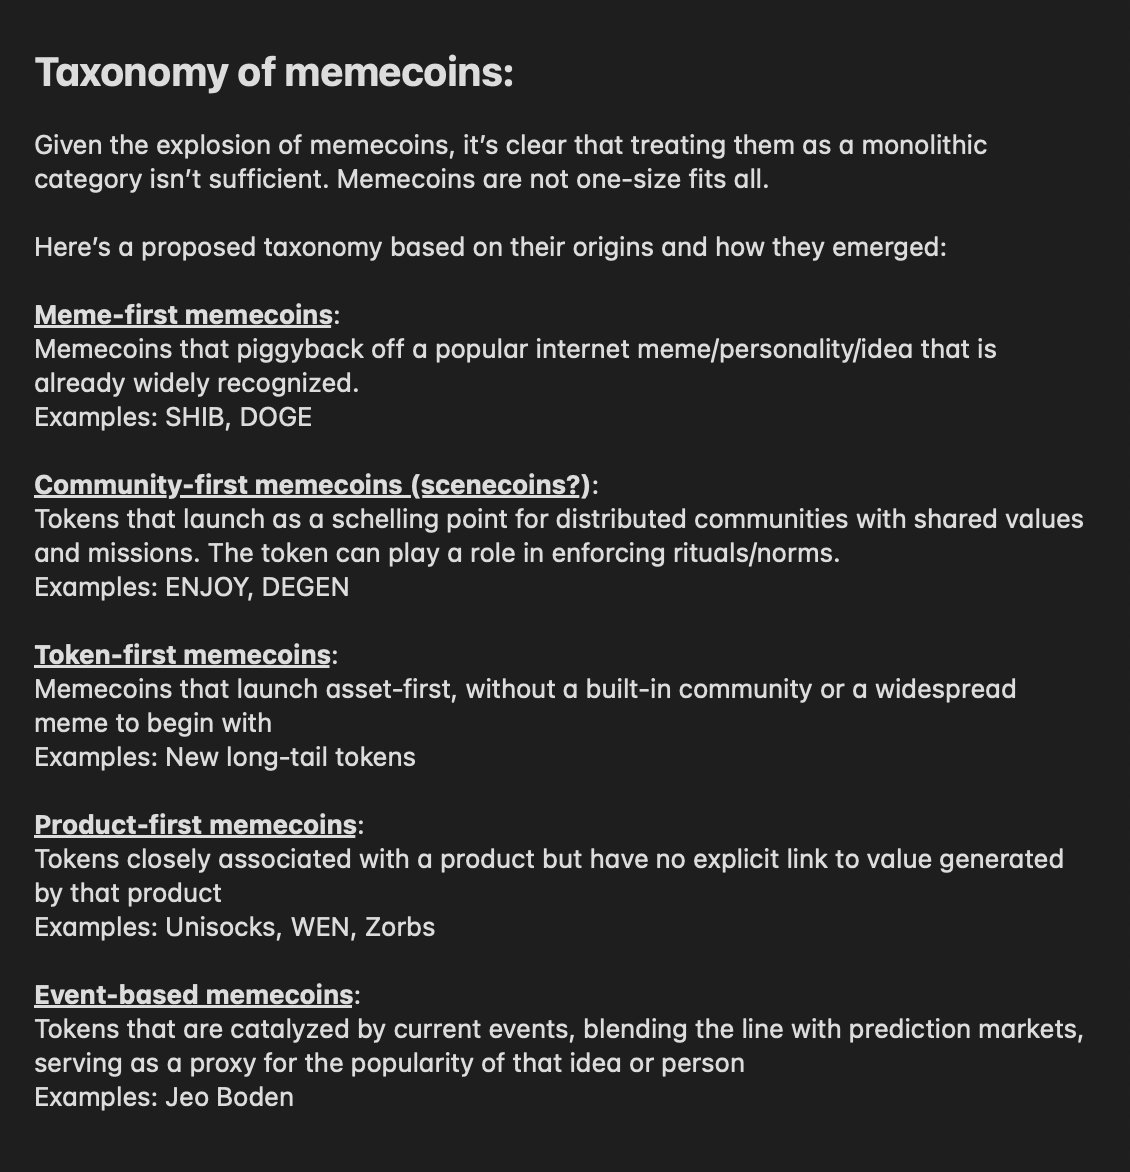 memecoin taxonomy: what should be added to this?